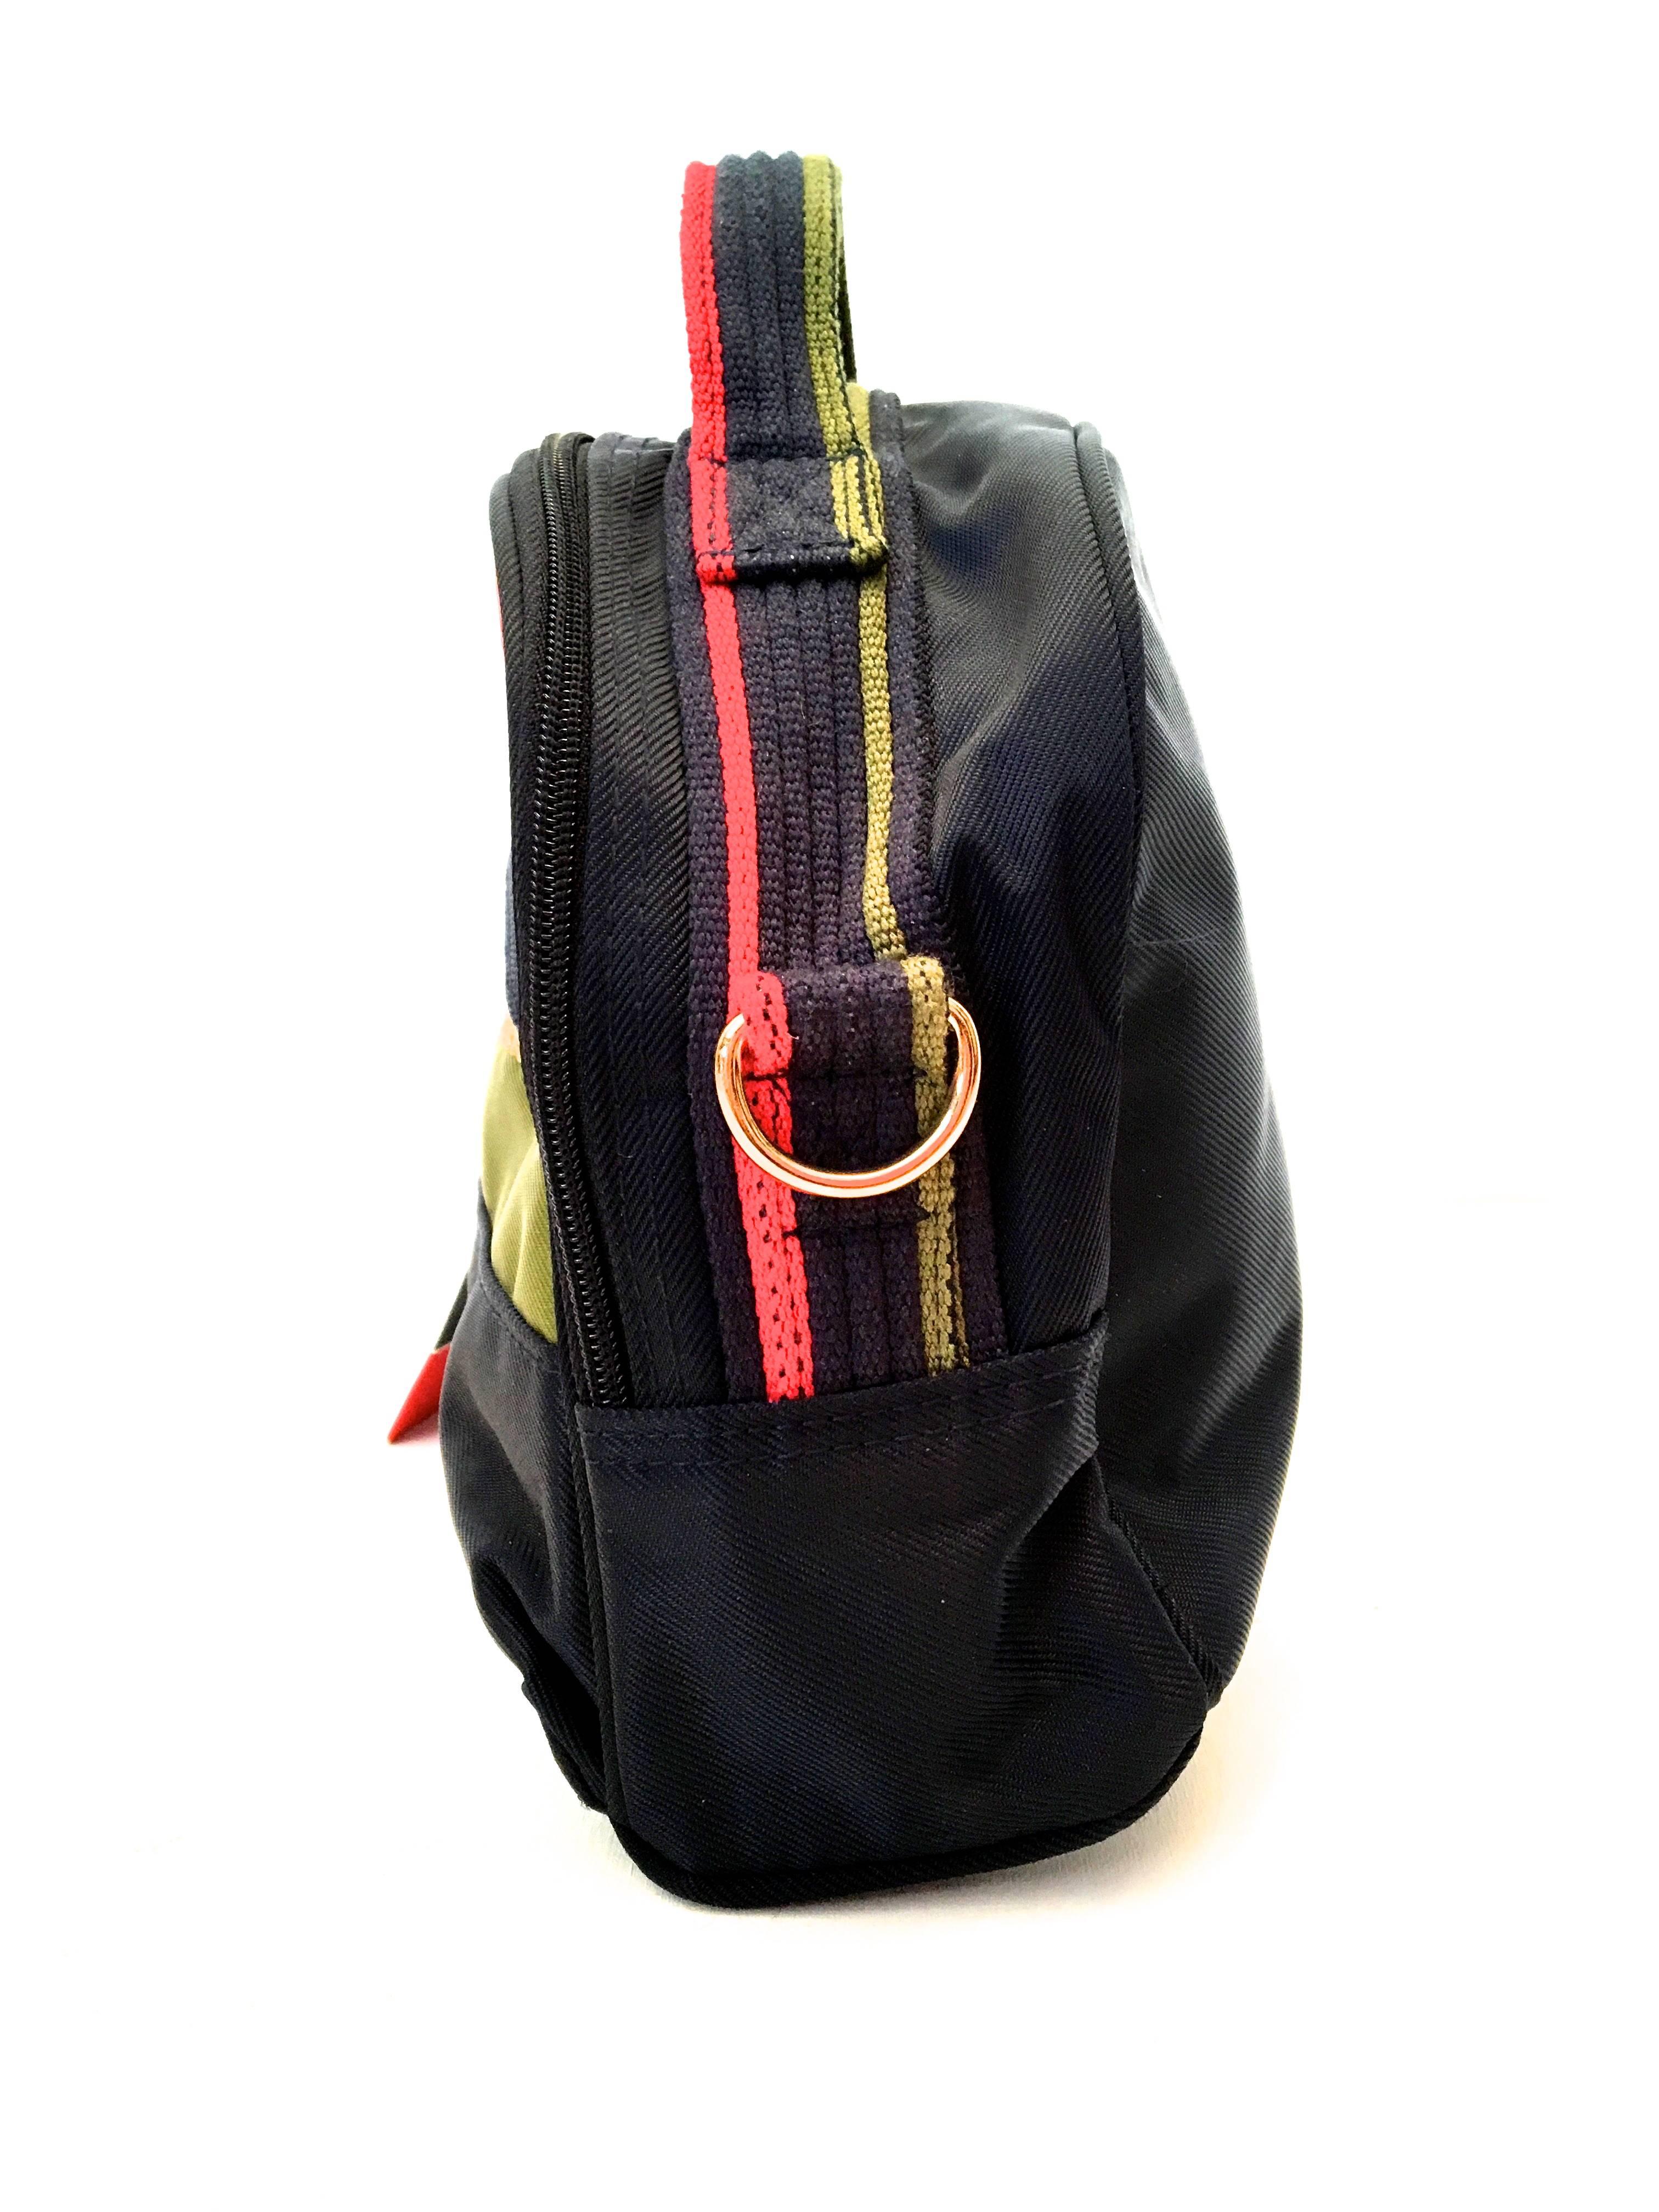 Presented here is a rare Roberta di Camerino nylon shoulder bag. The bag is comprised of red, green and navy blue colors in nylon fabric. There is a gold tone Roberta di Camerino emblem on the exterior of the bag. The bag has a main large pocket and